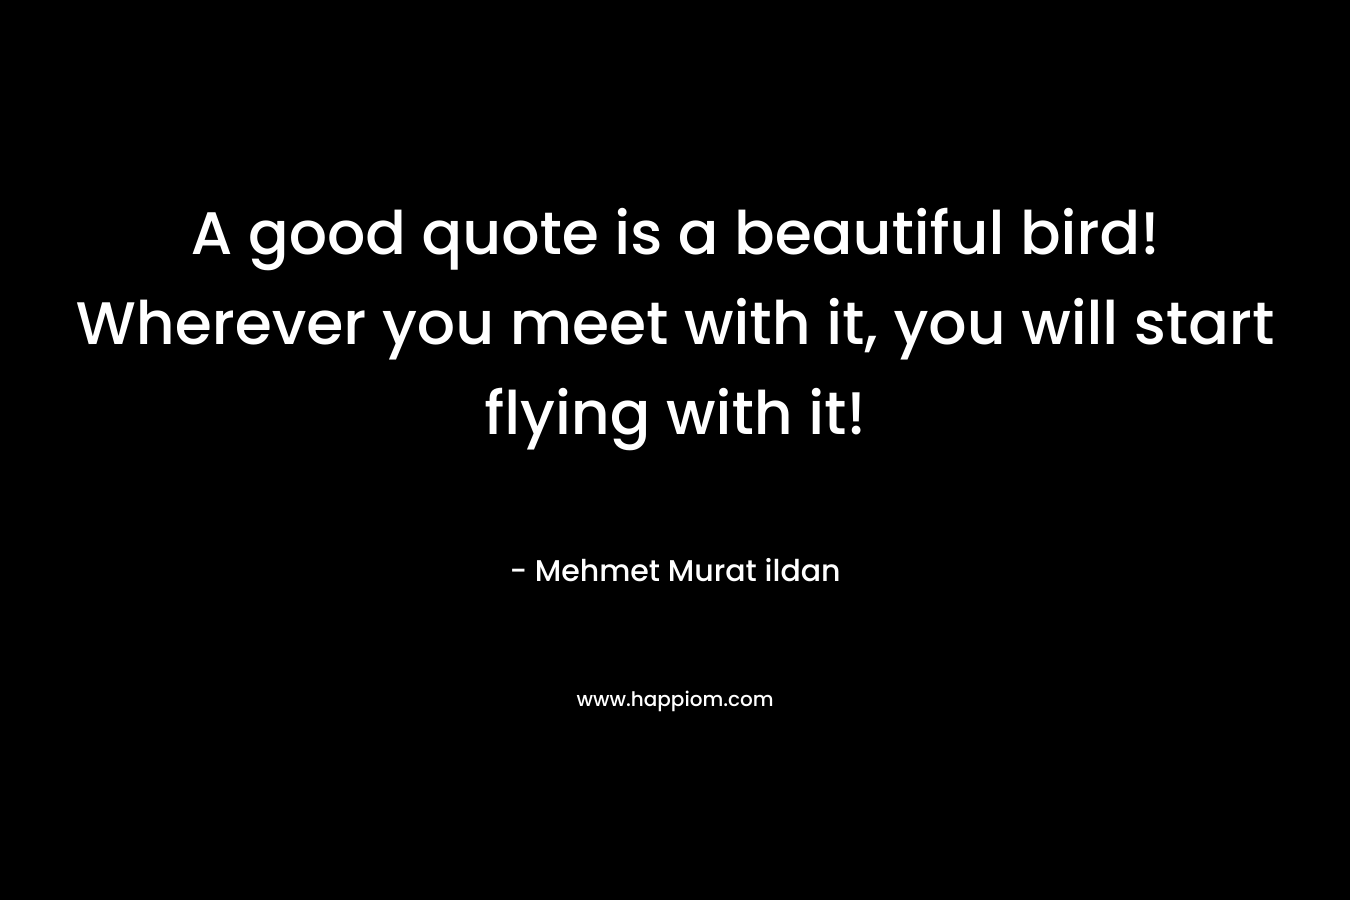 A good quote is a beautiful bird! Wherever you meet with it, you will start flying with it!